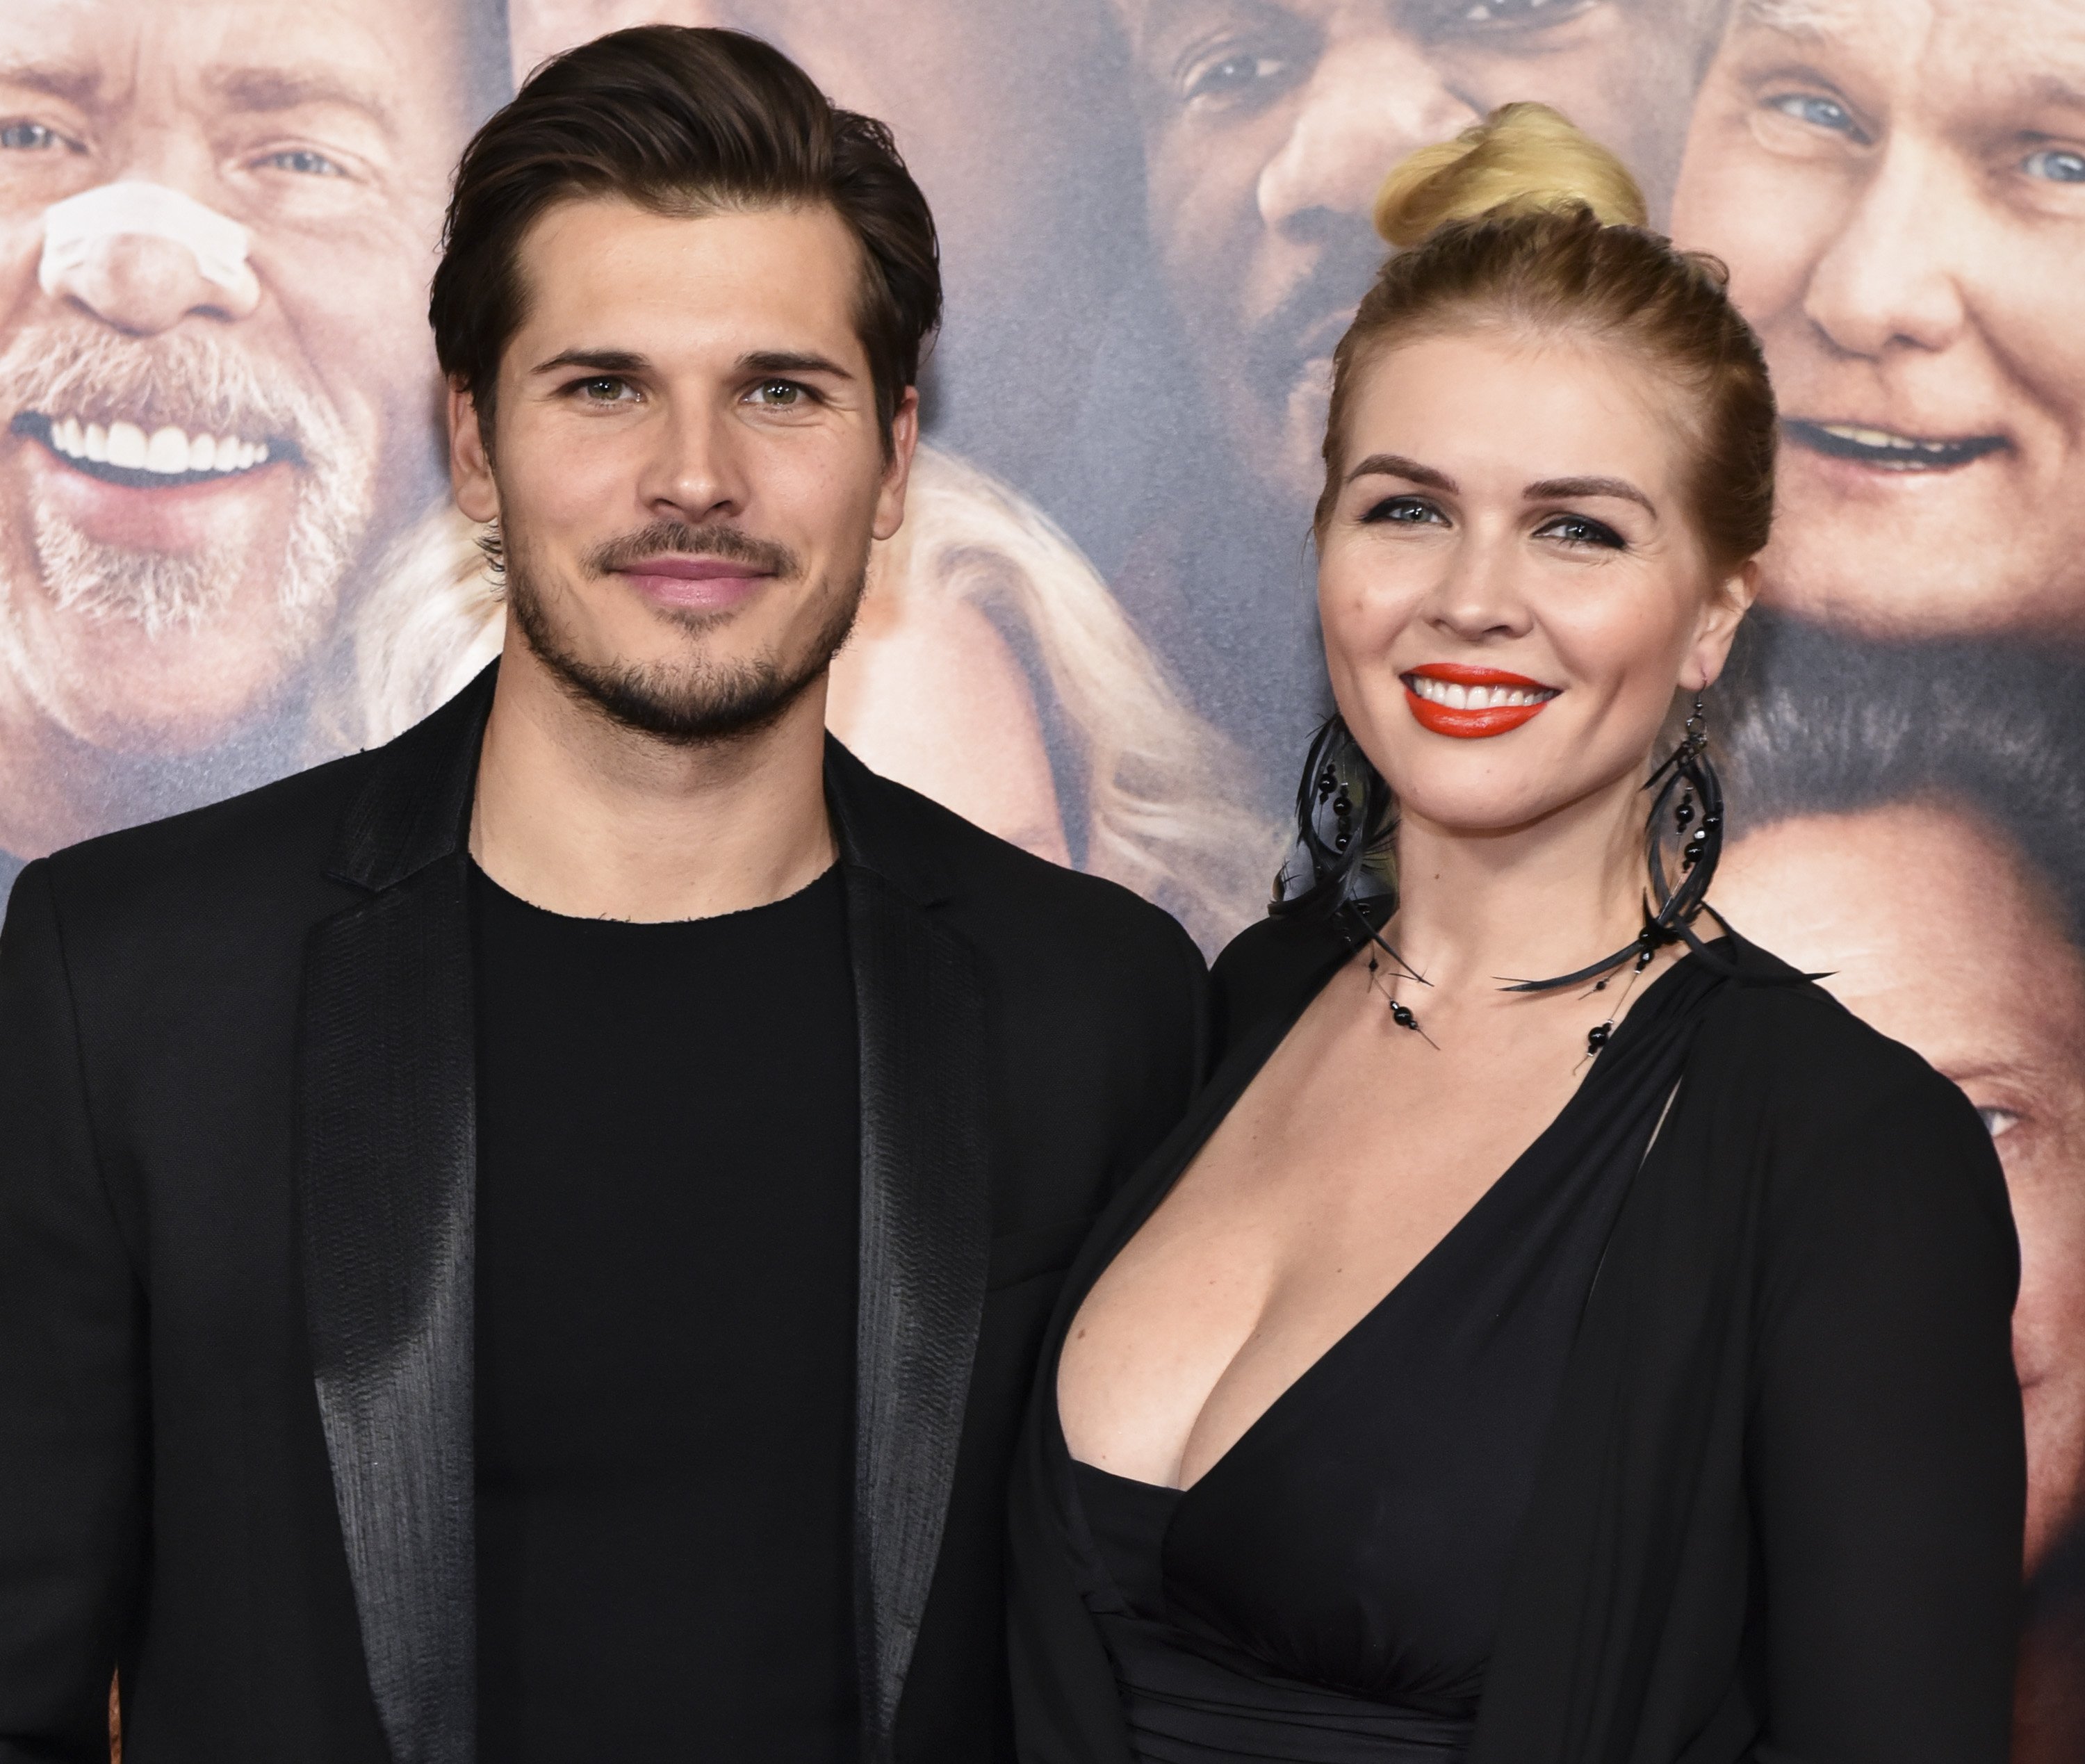 Gleb Savchenko and Elena Samodanova pictured at the premiere of Warner Bros. Pictures' "Father Figures" at TCL Chinese Theatre, 2017, Hollywood, California. | Photo: Getty Images